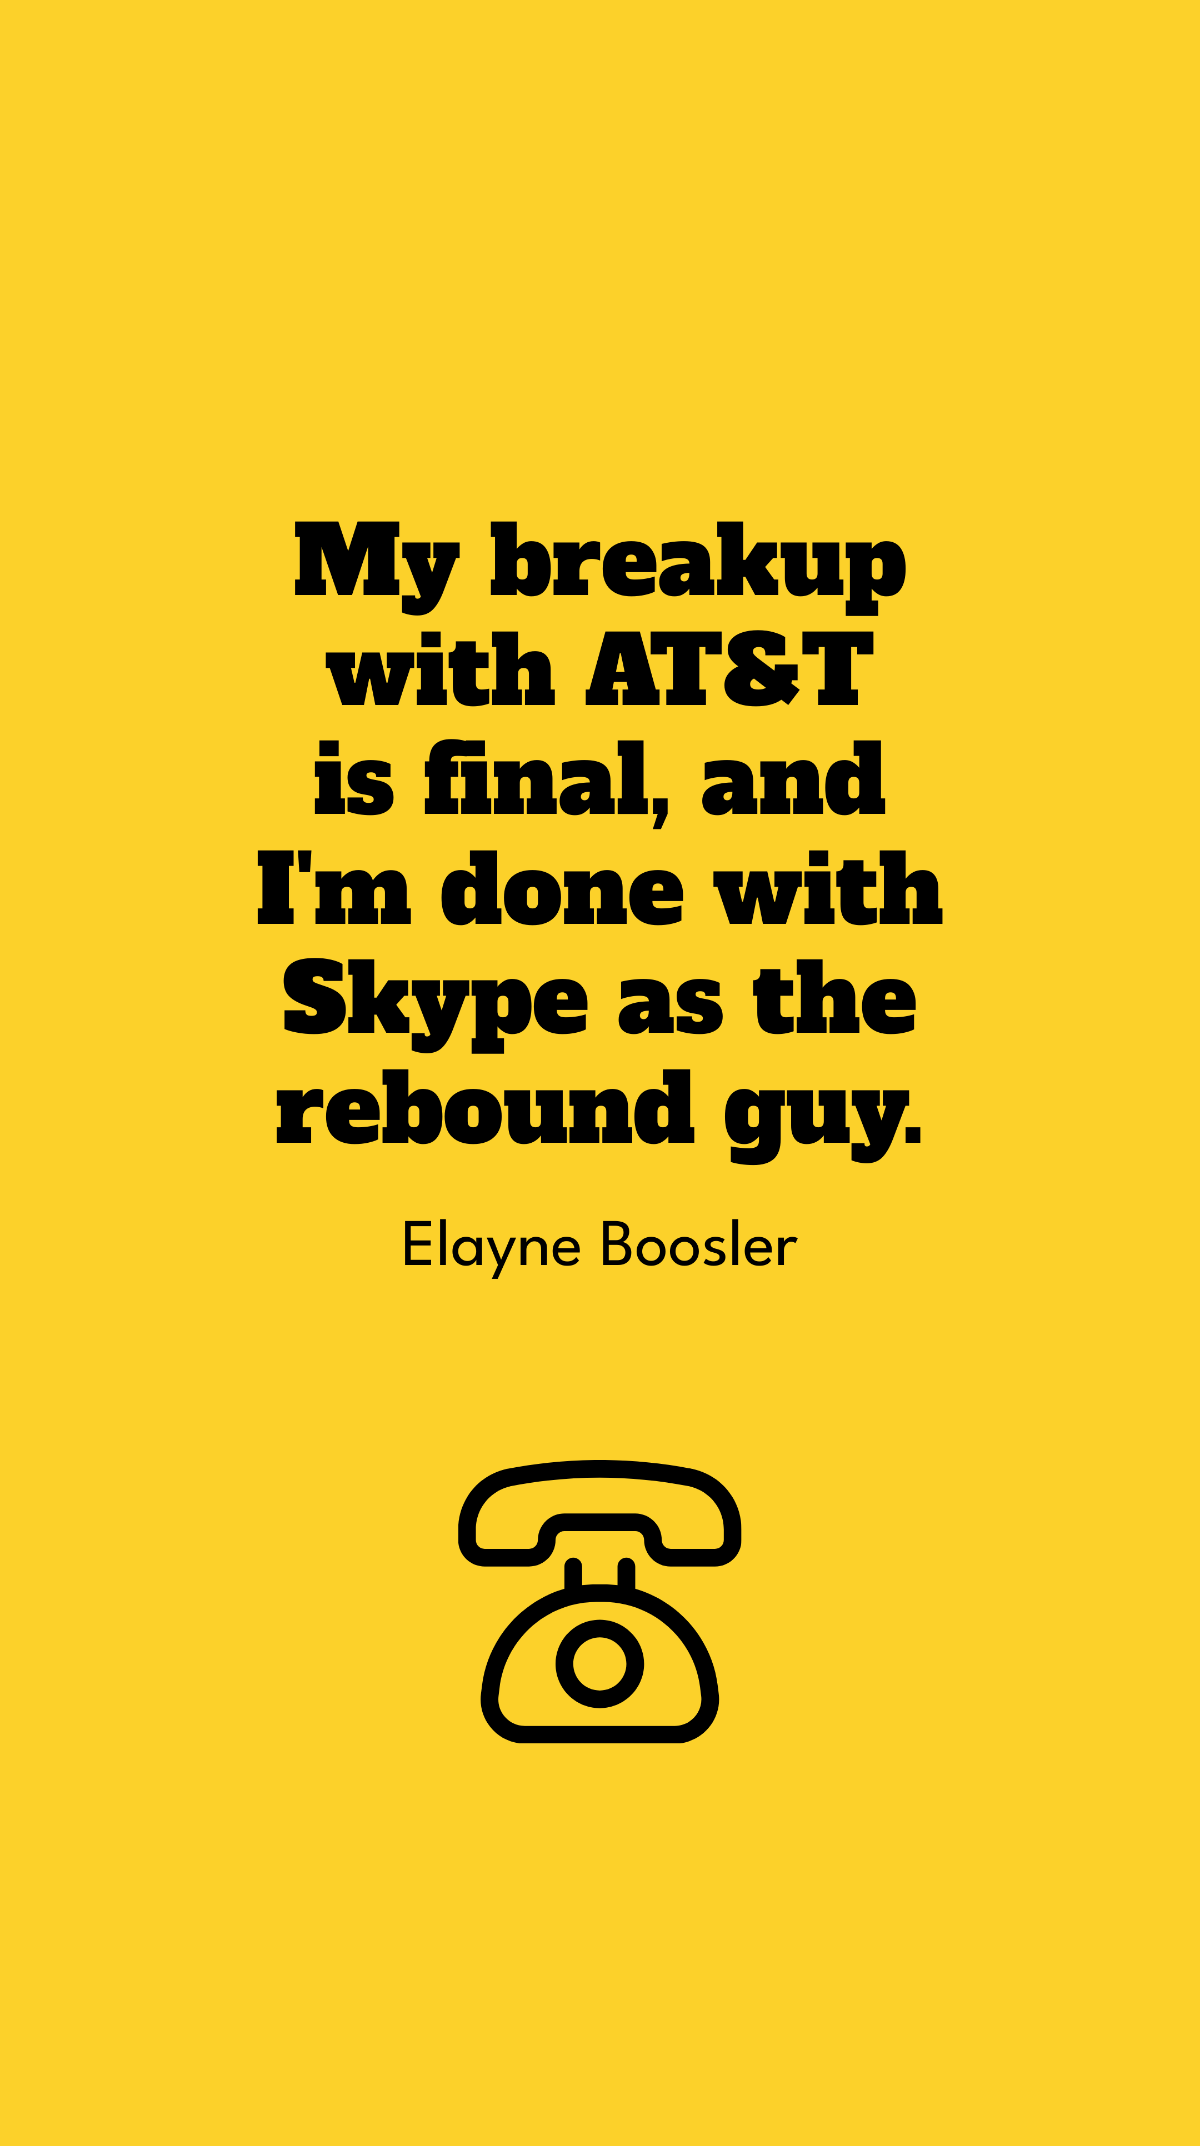 Free Elayne Boosler - My breakup with AT&T is final, and I'm done with Skype as the rebound guy. Template